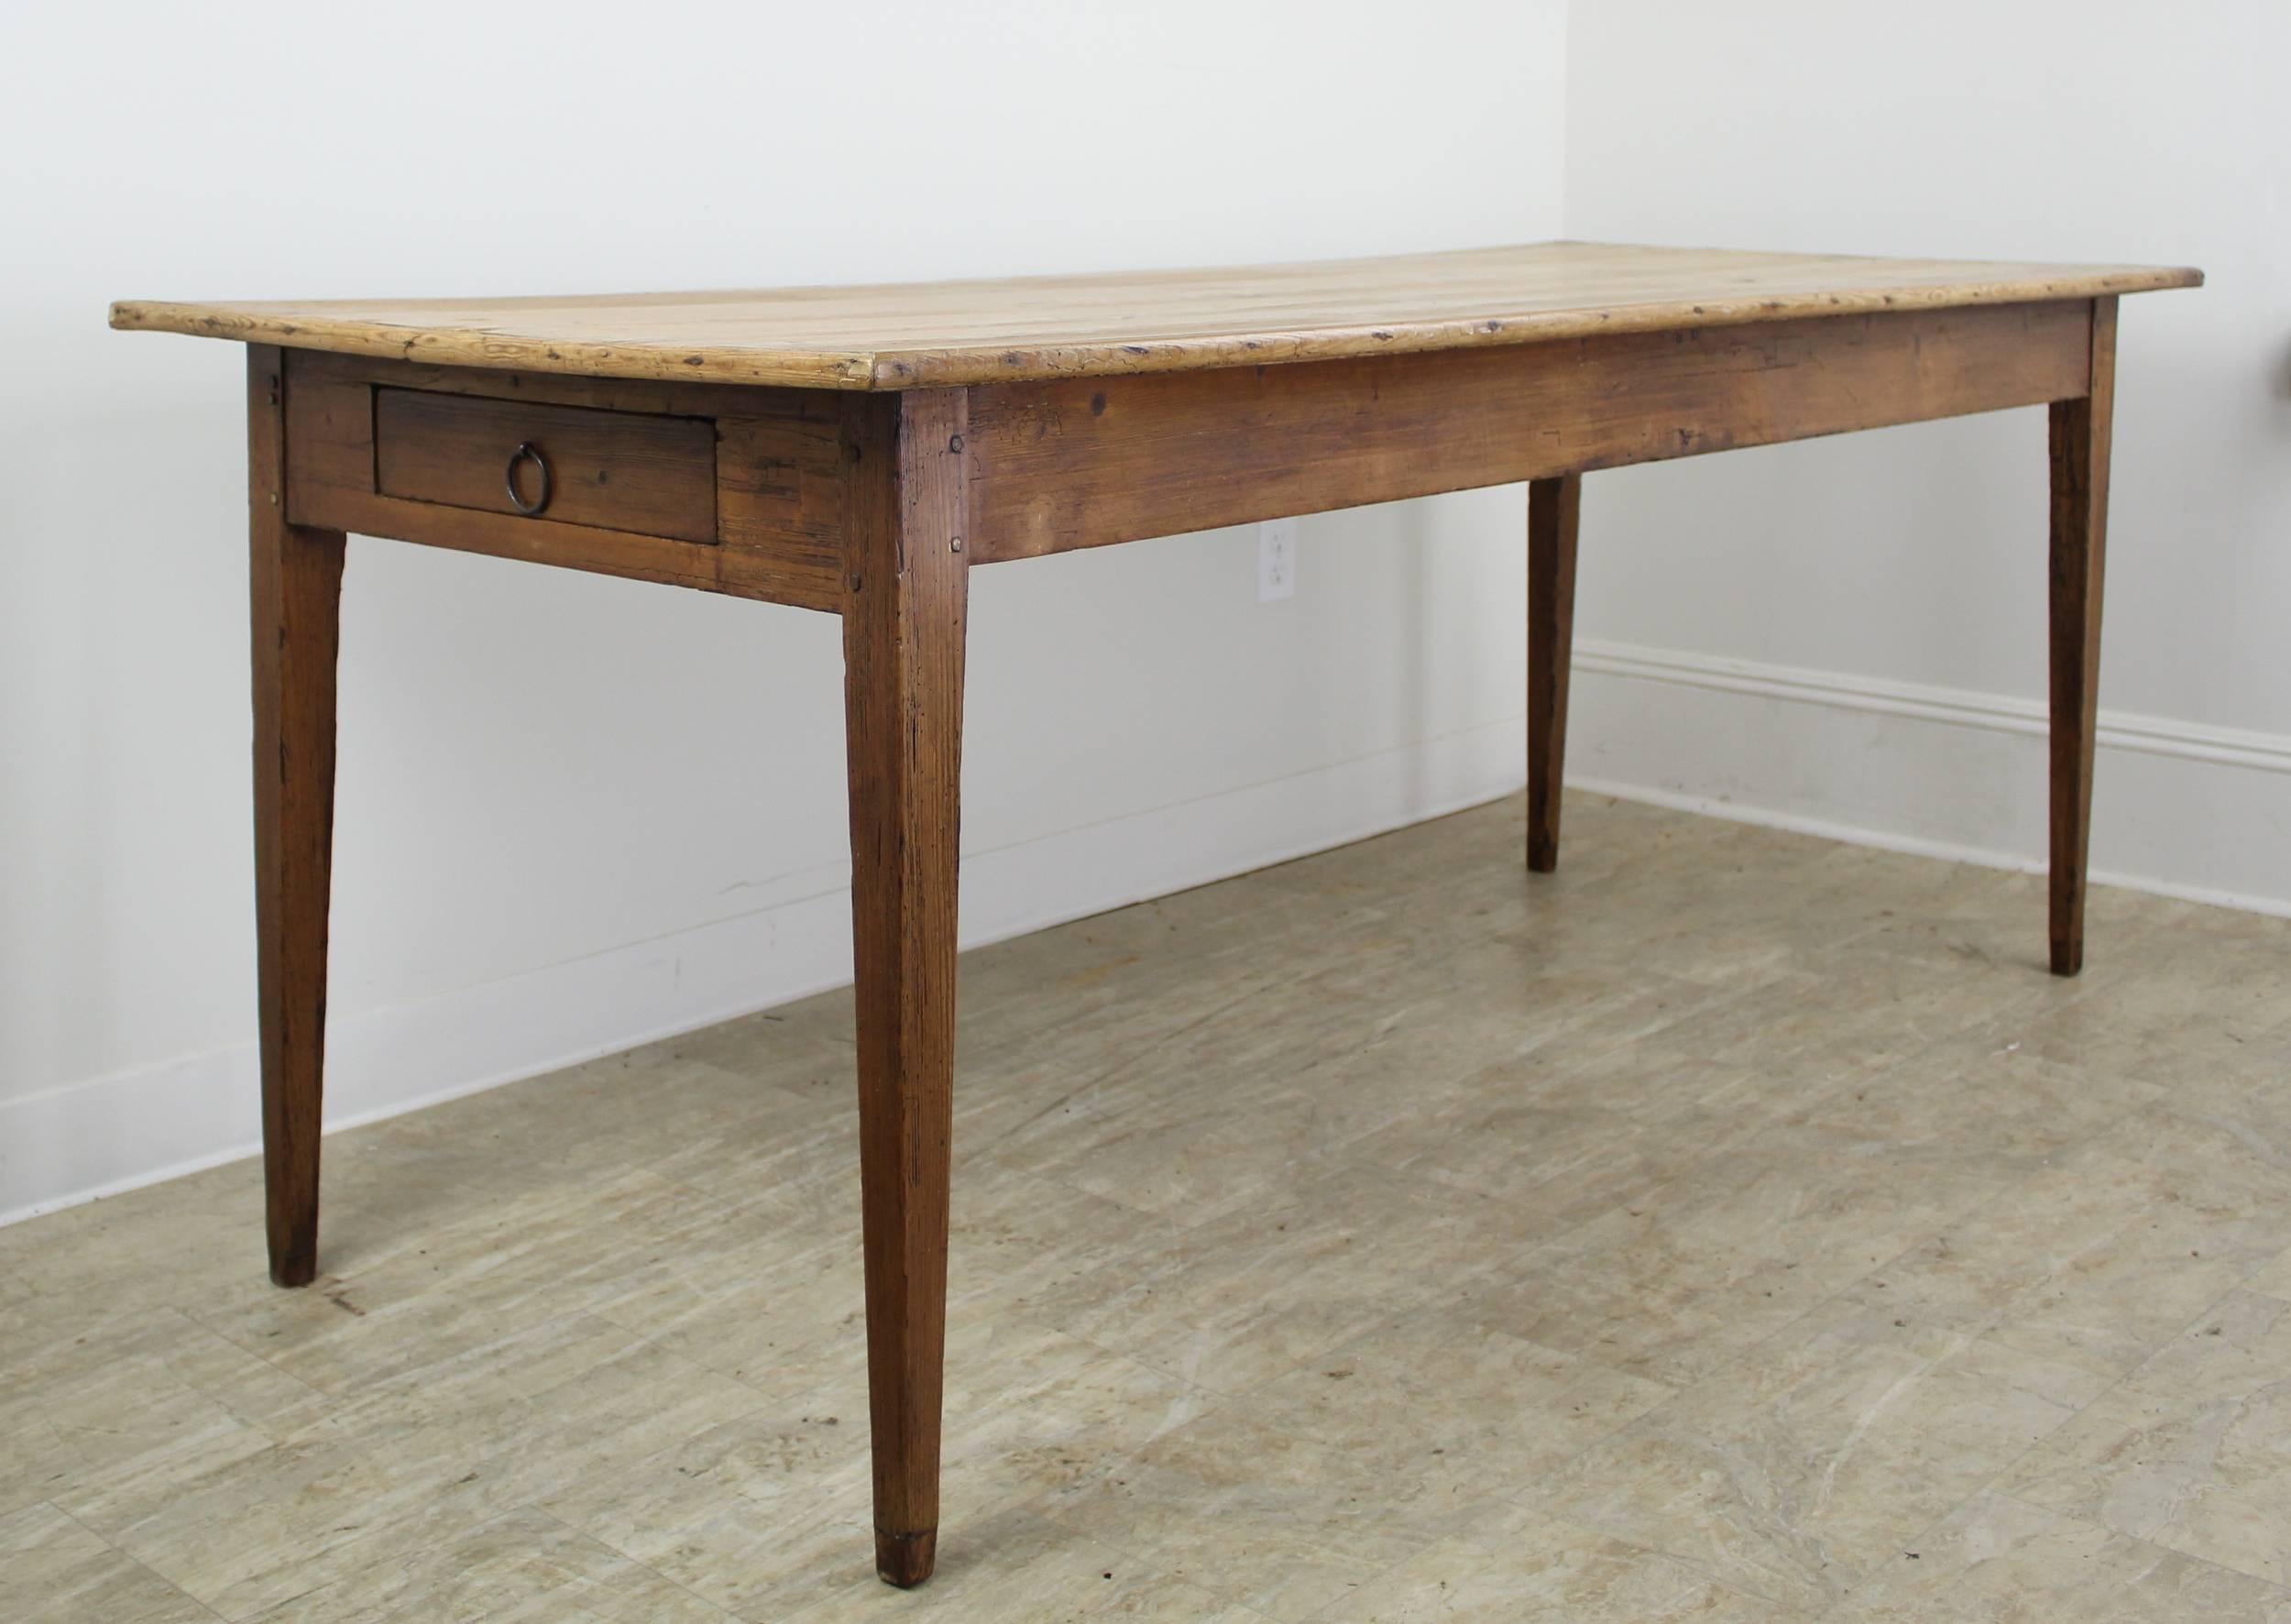 A graceful very light pine farm table with a decorative edge and rustic appeal. Fine naturalistic features and full grain bring loads of character to this simple country piece. The top and legs boast fine patina. 25 inch apron height is good for